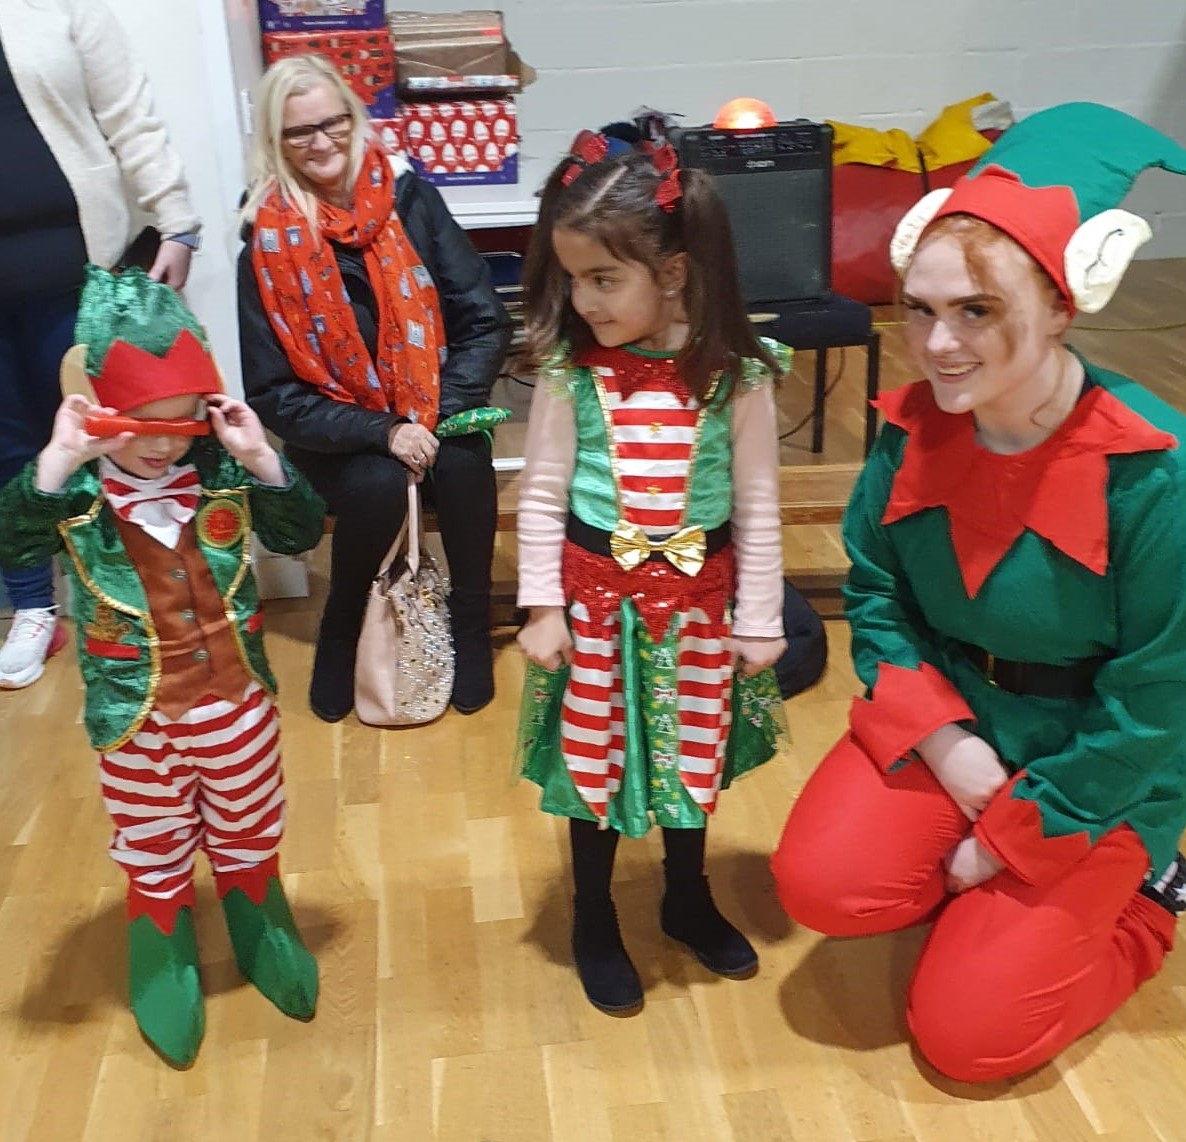 Children dressed as elves at the party